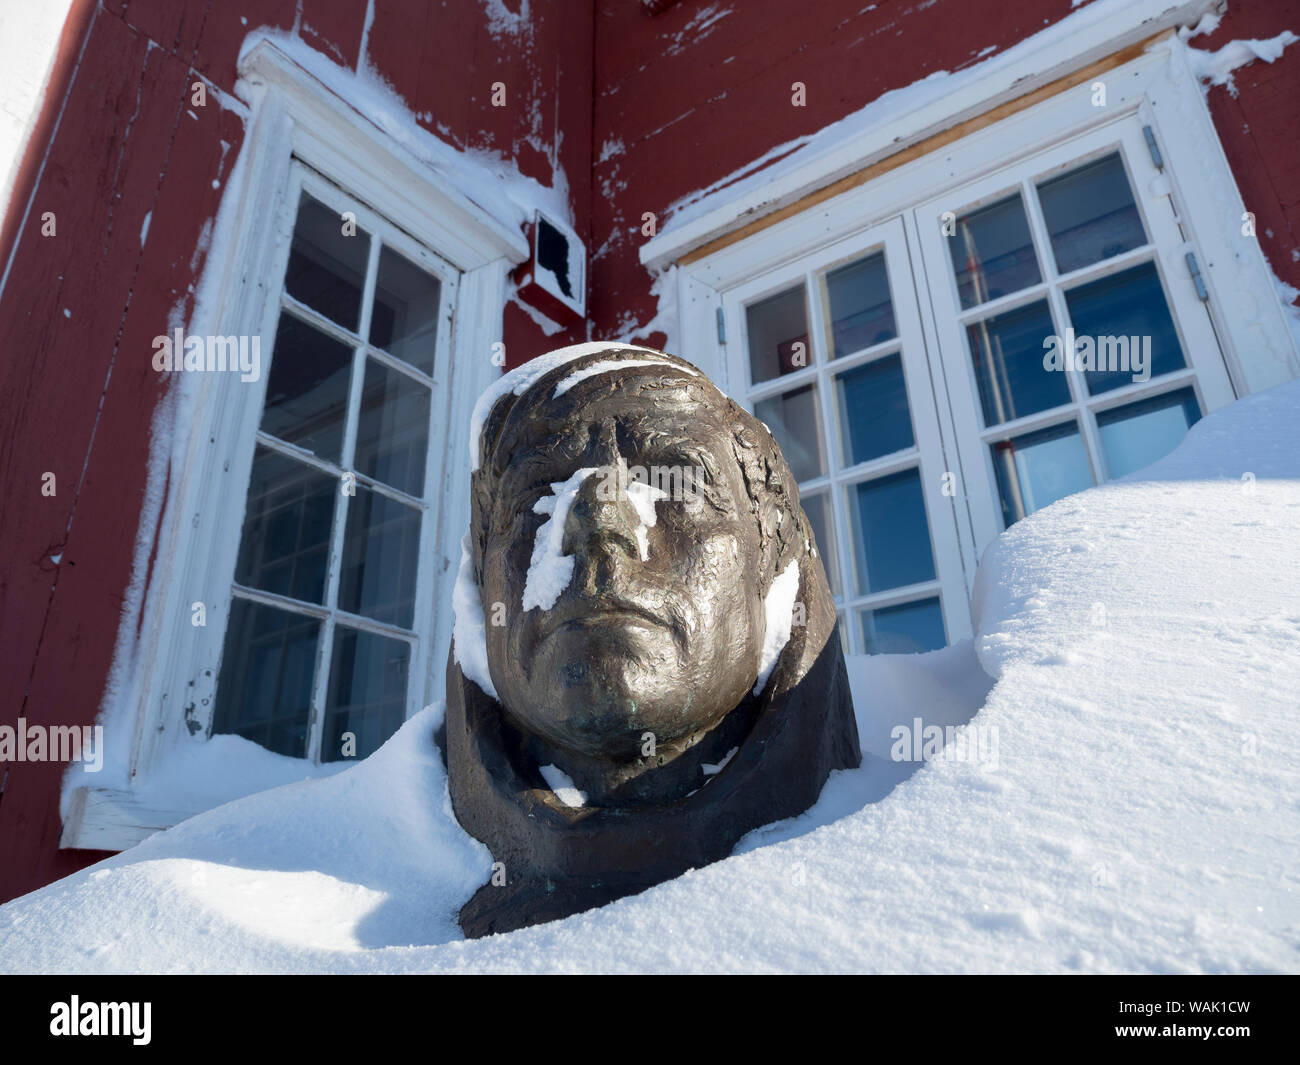 Knud Rasmussen's Museum, bust of Knut Rasmussen. Greenland. (Editorial Use Only) Stock Photo